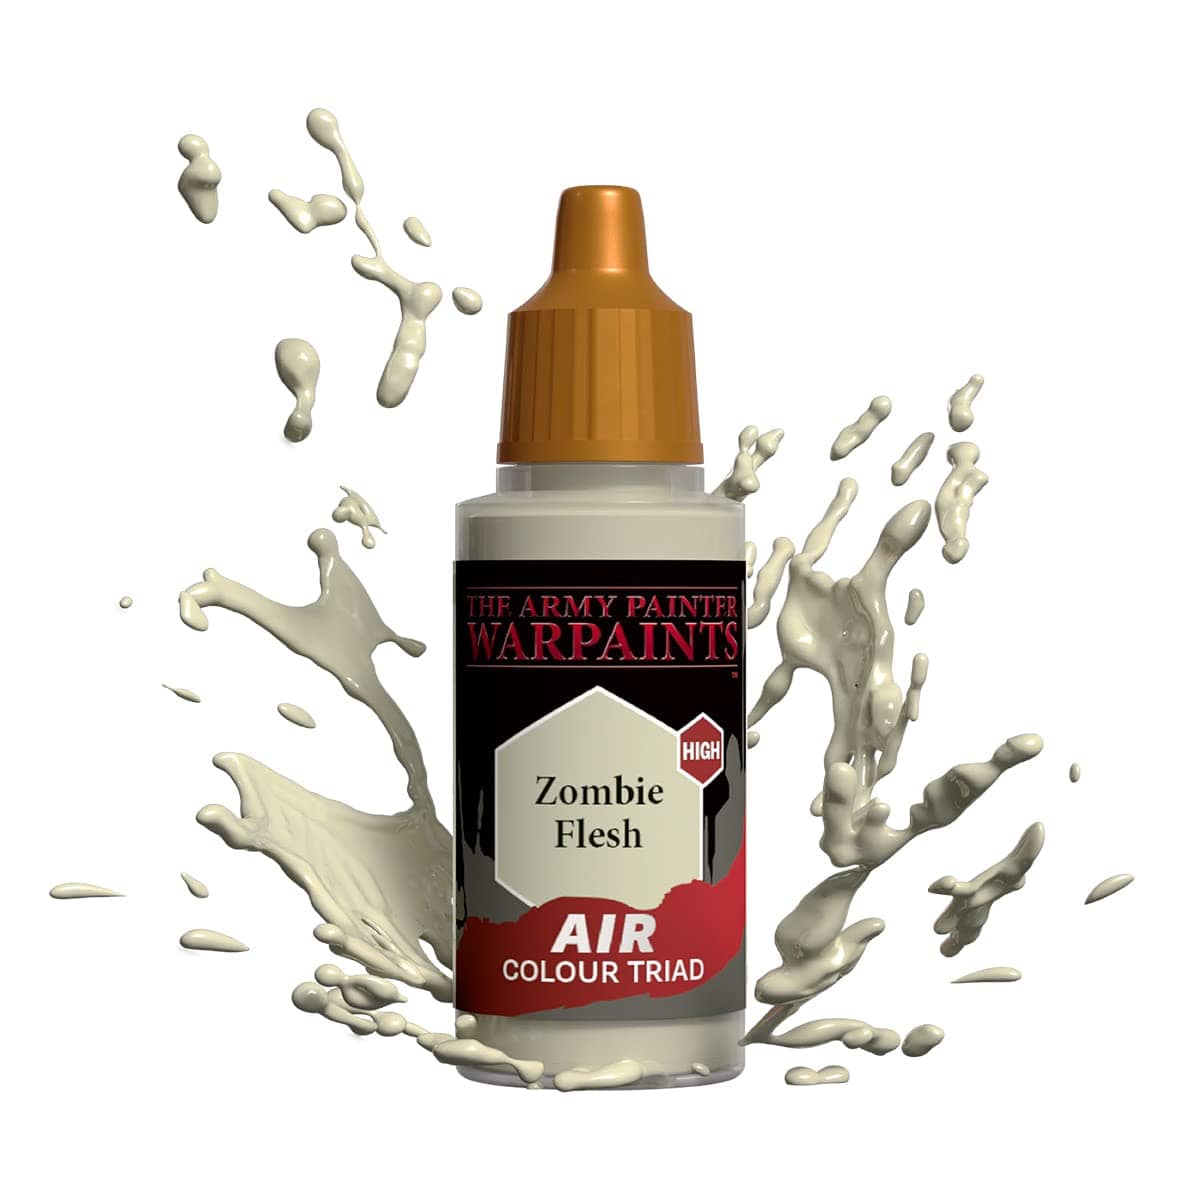 The Army Painter Accessories The Army Painter Warpaints Air: Zombie Flesh 18ml